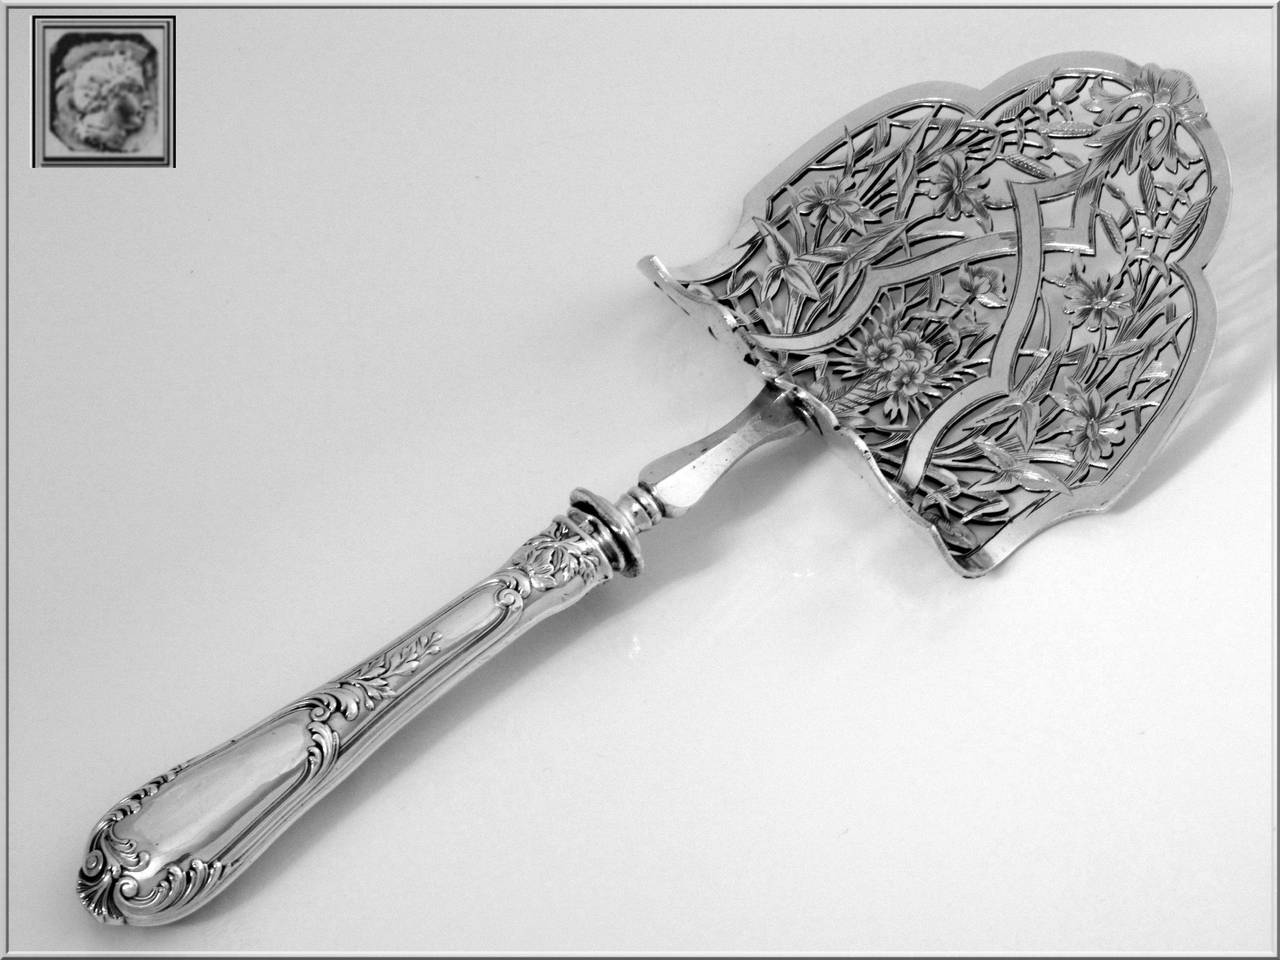 Soufflot Fabulous French Sterling Silver Asparagus/Pastry/Toast Server Rococo In Good Condition For Sale In Triaize, Pays de Loire